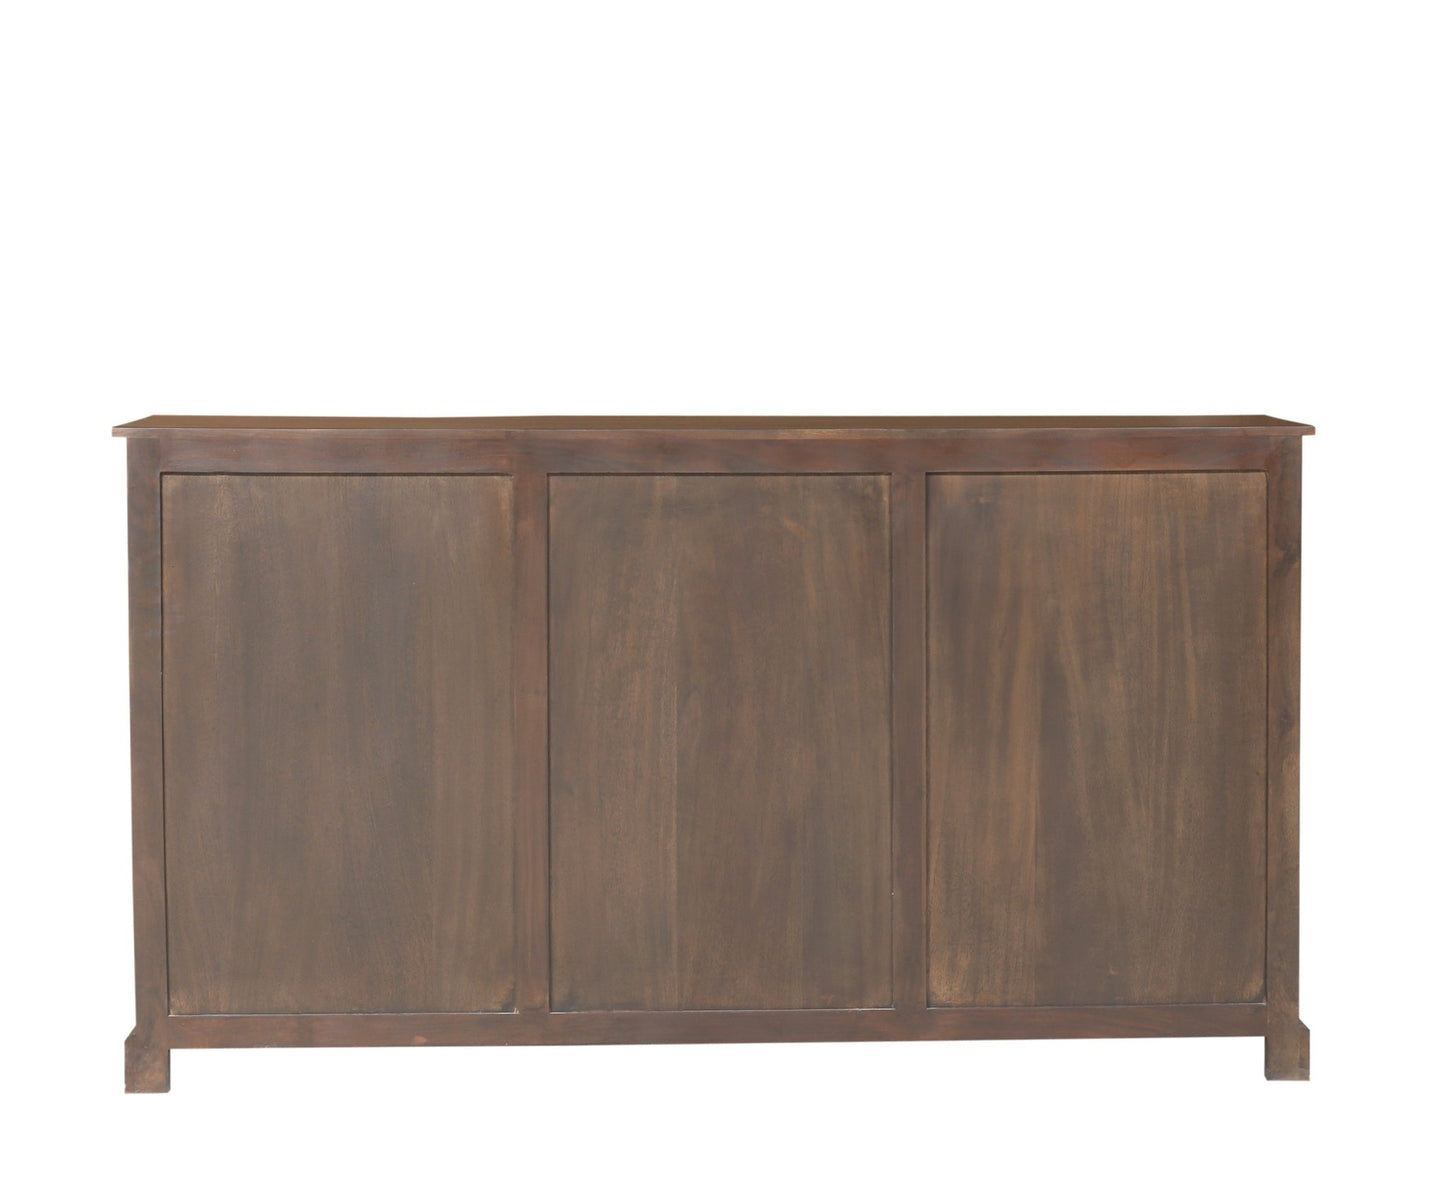 Clairton 72" 4 Door Sideboard - Natural + Black - The Furnishery